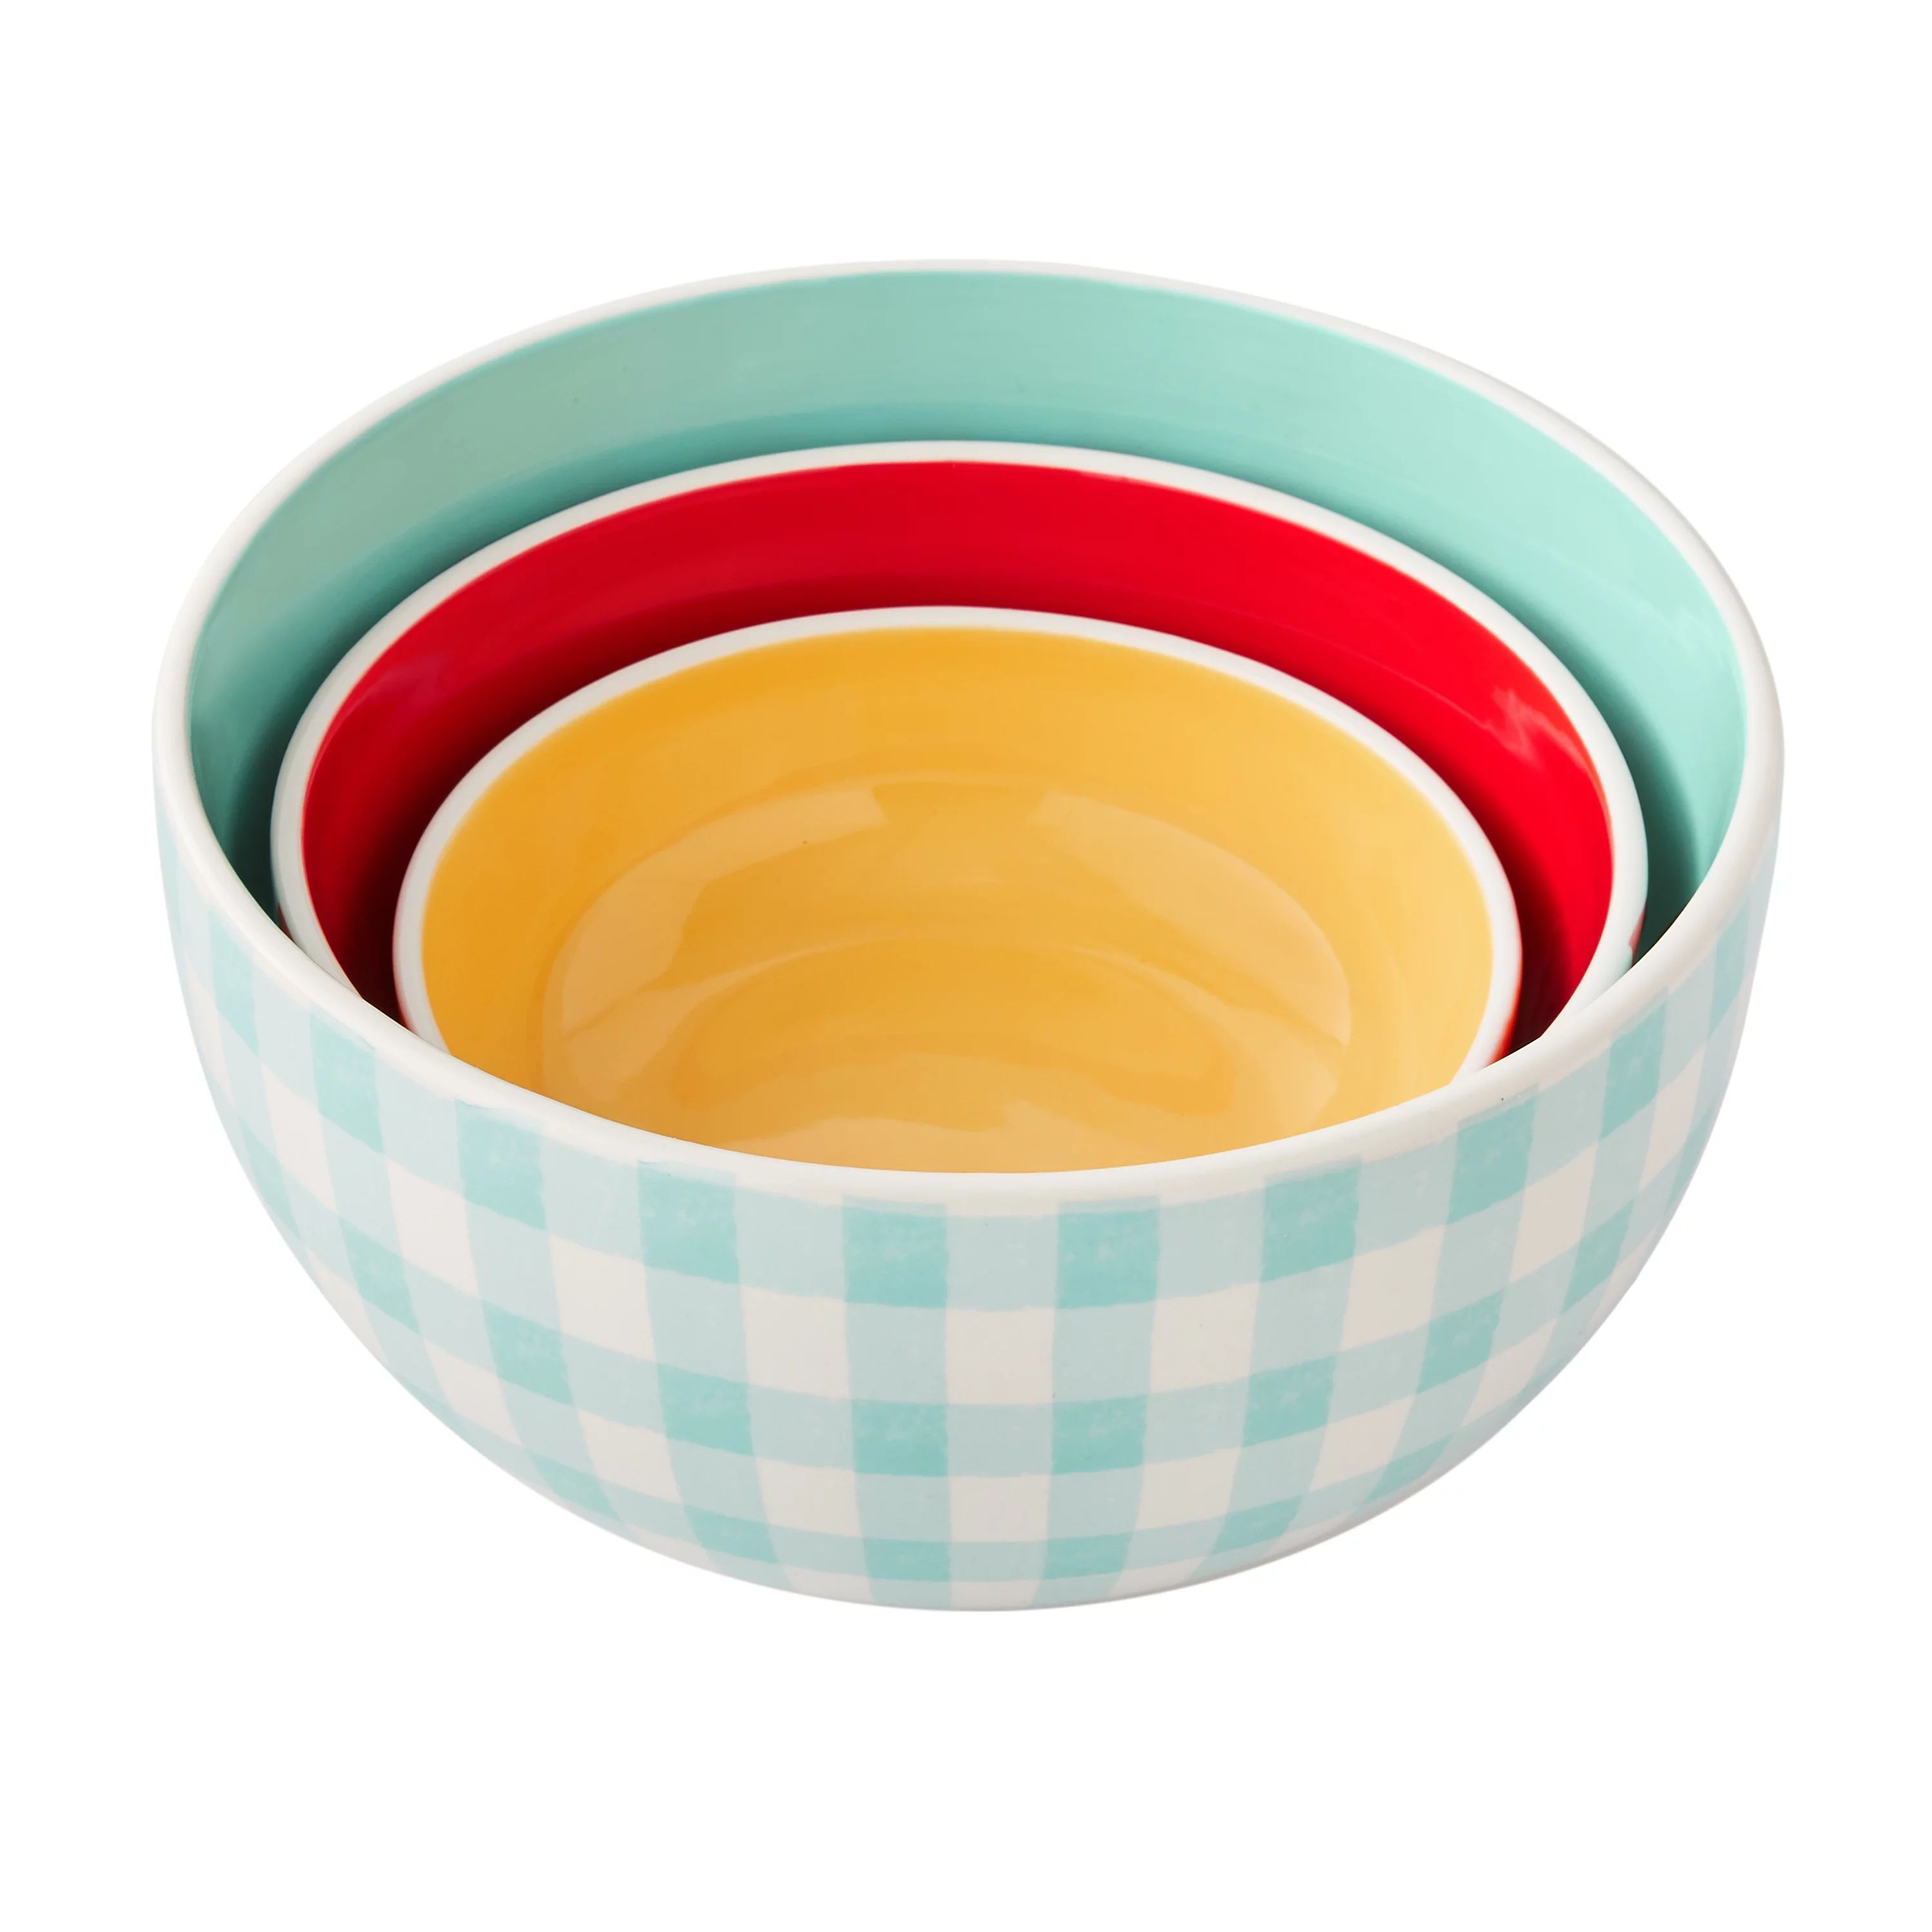 The Pioneer Woman 3-Piece Floral Check Ceramic Lidded Bowl Set | Walmart (US)